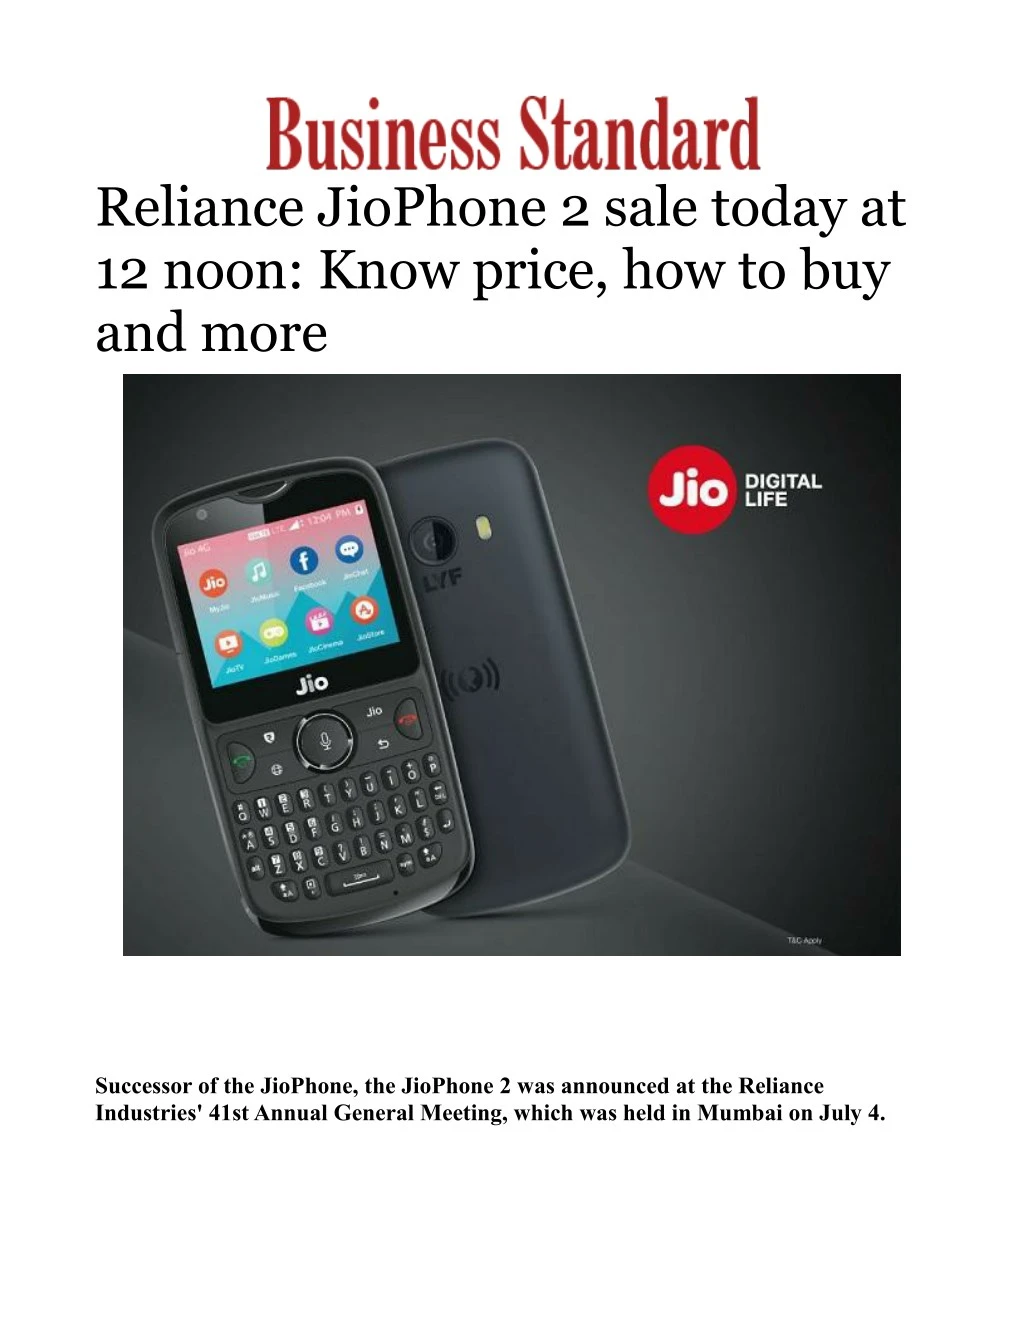 reliance jiophone 2 sale today at 12 noon know